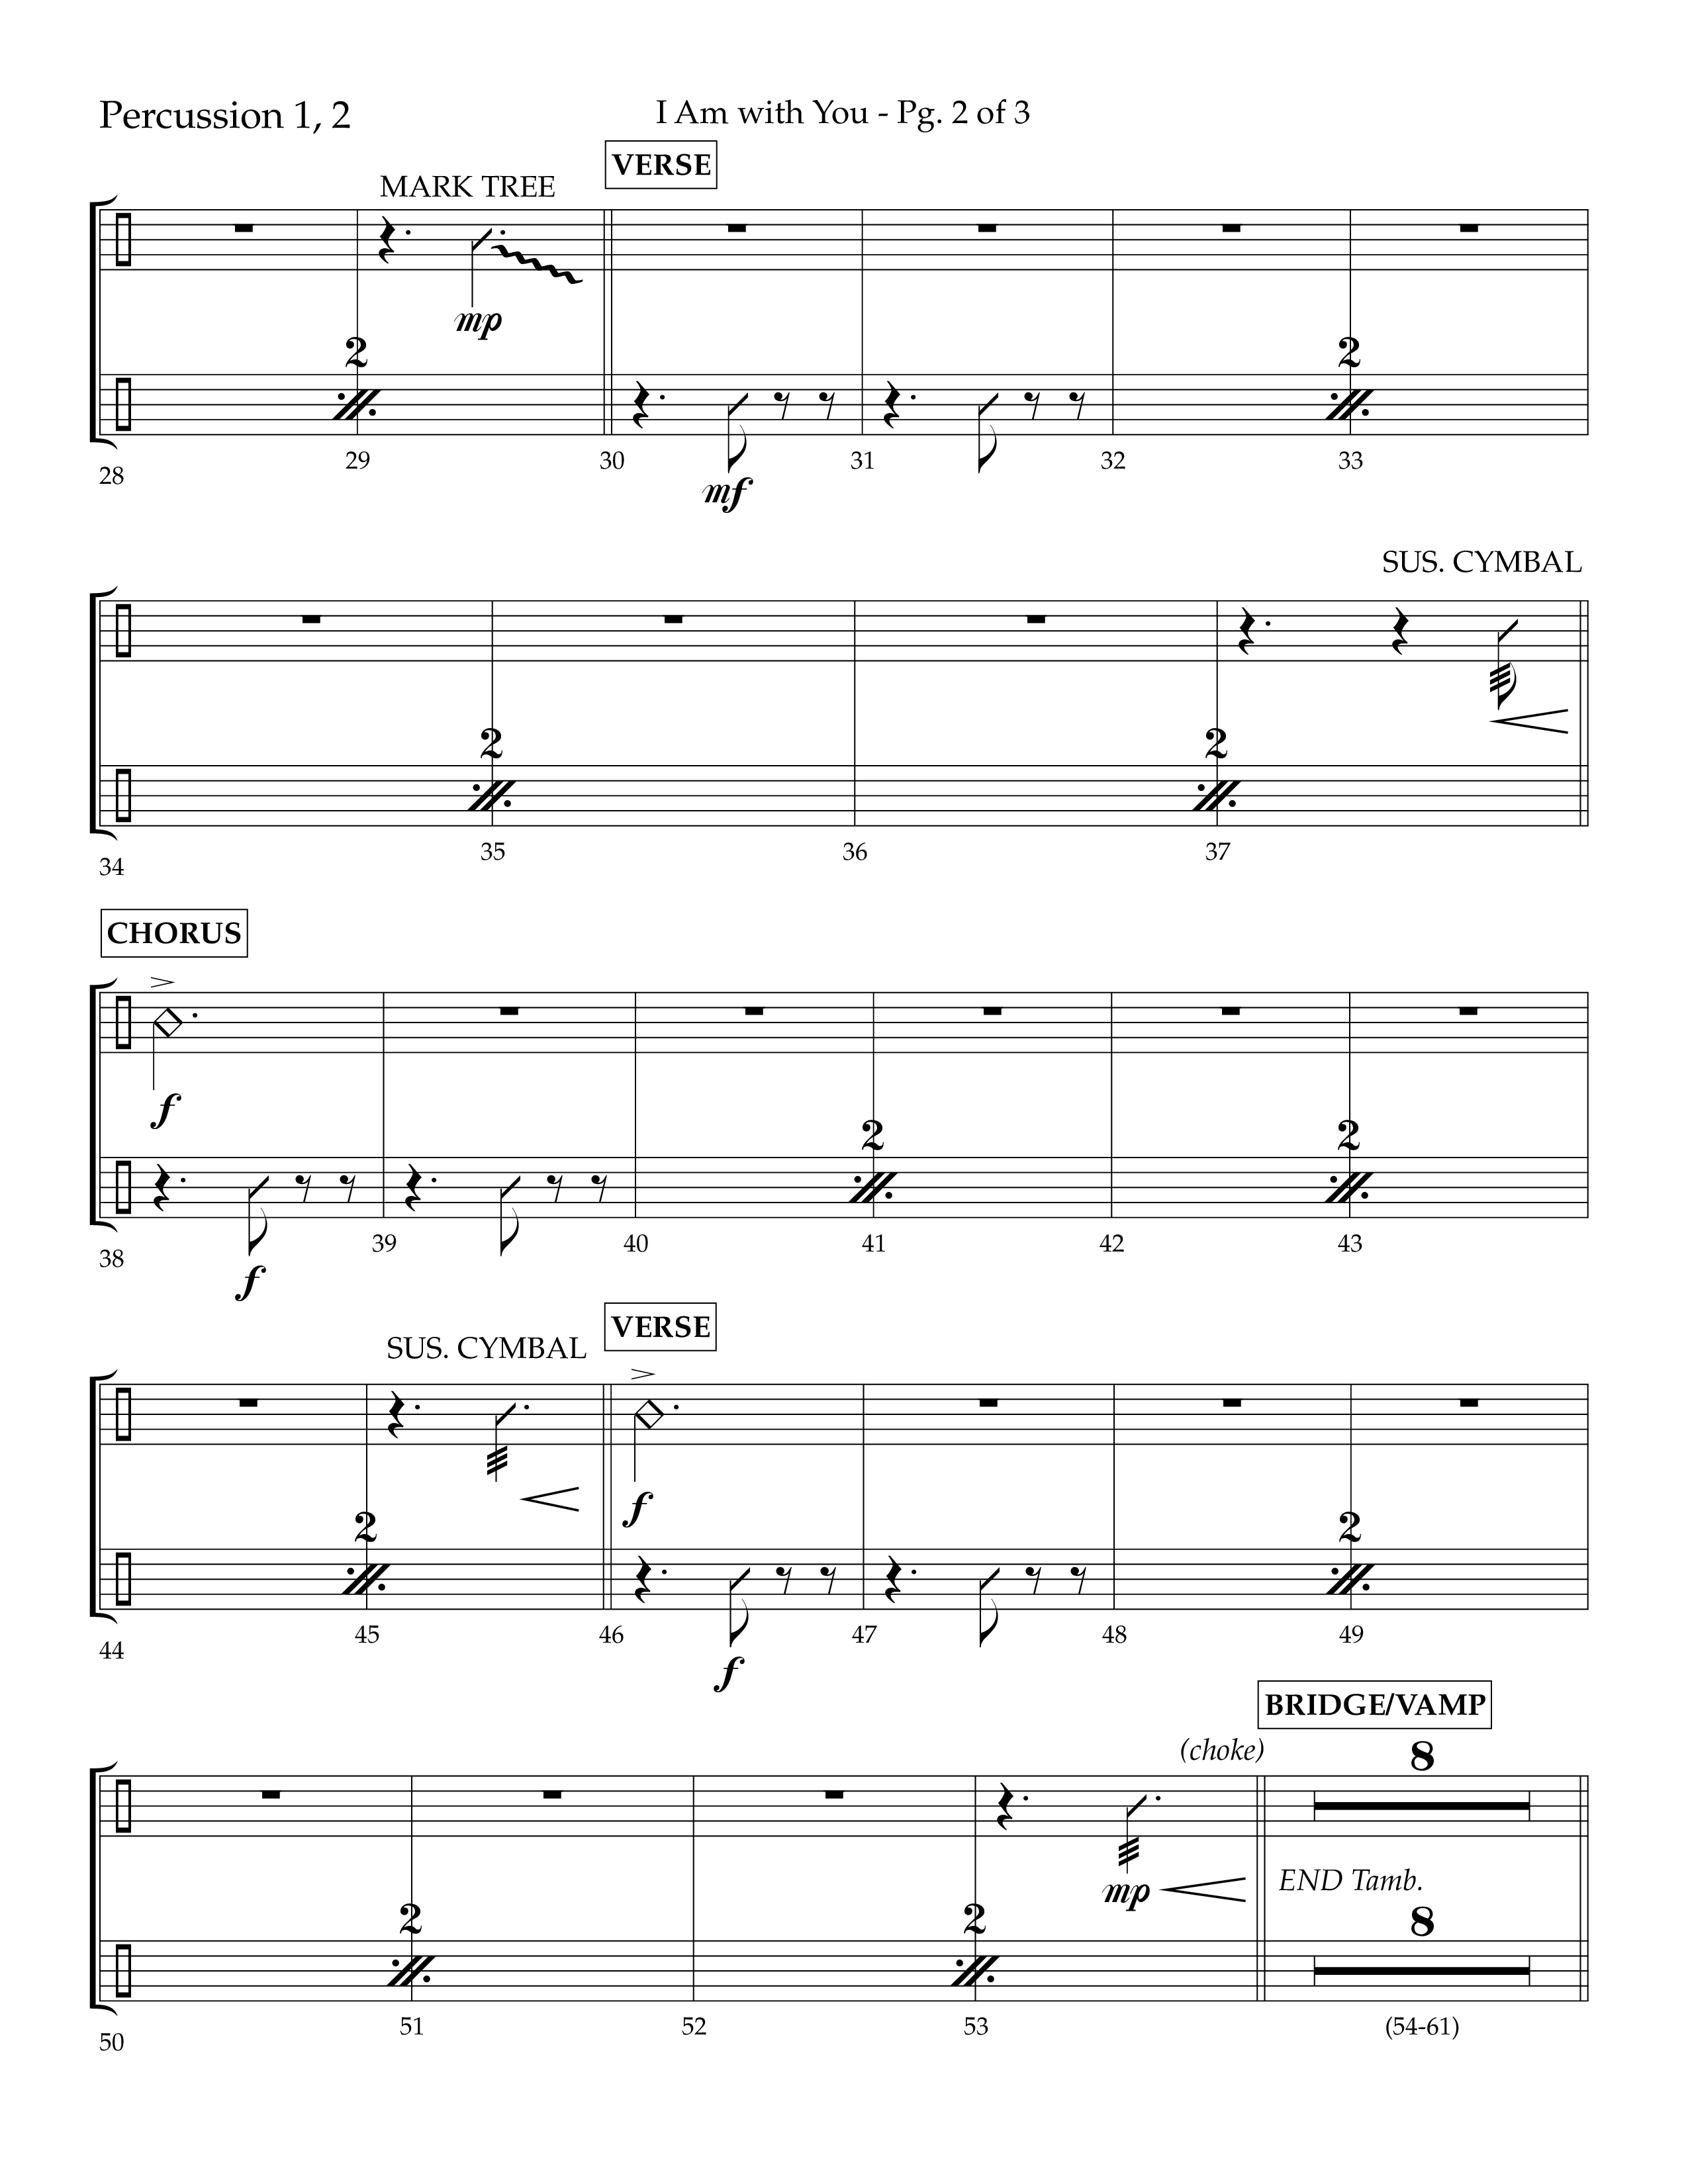 I Am With You (Choral Anthem SATB) Percussion 1/2 (Lifeway Choral / Arr. Cliff Duren)